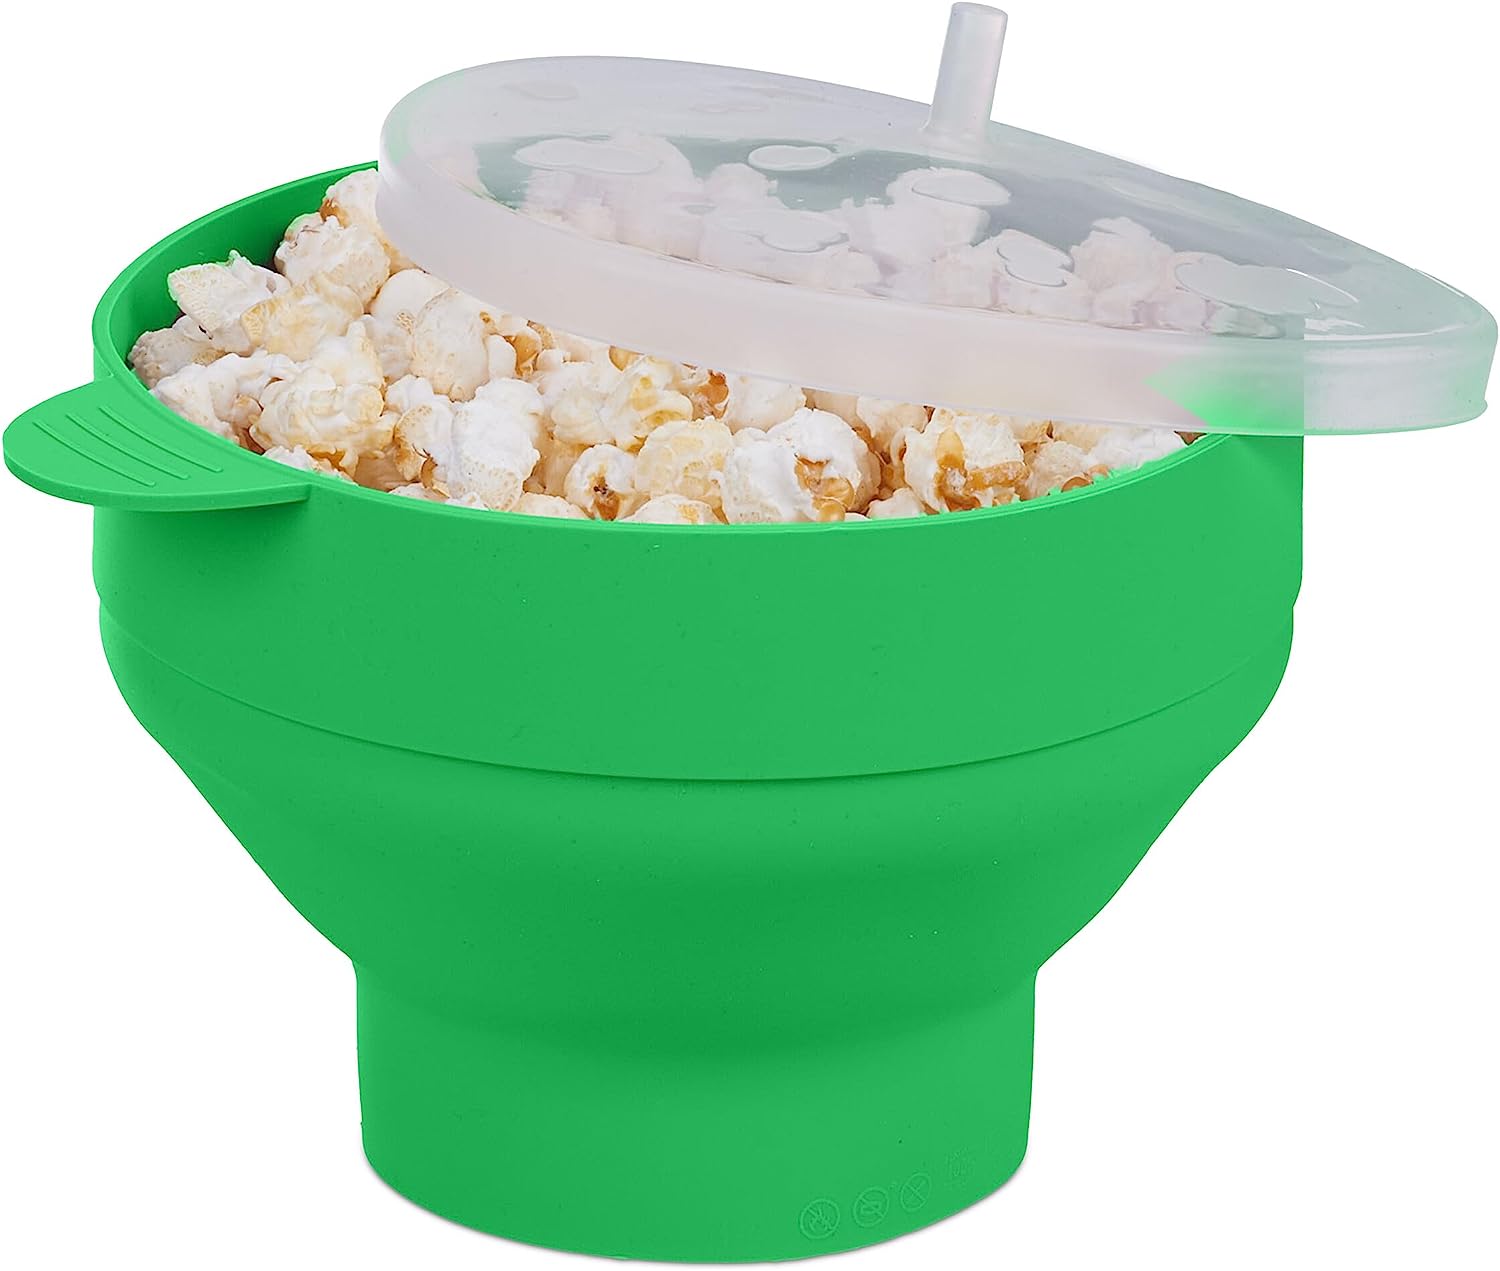 Relaxdays Microwave Popcorn Maker, Silicone BPA Free Popcorn Popper with Lid & Handles, Foldable Green